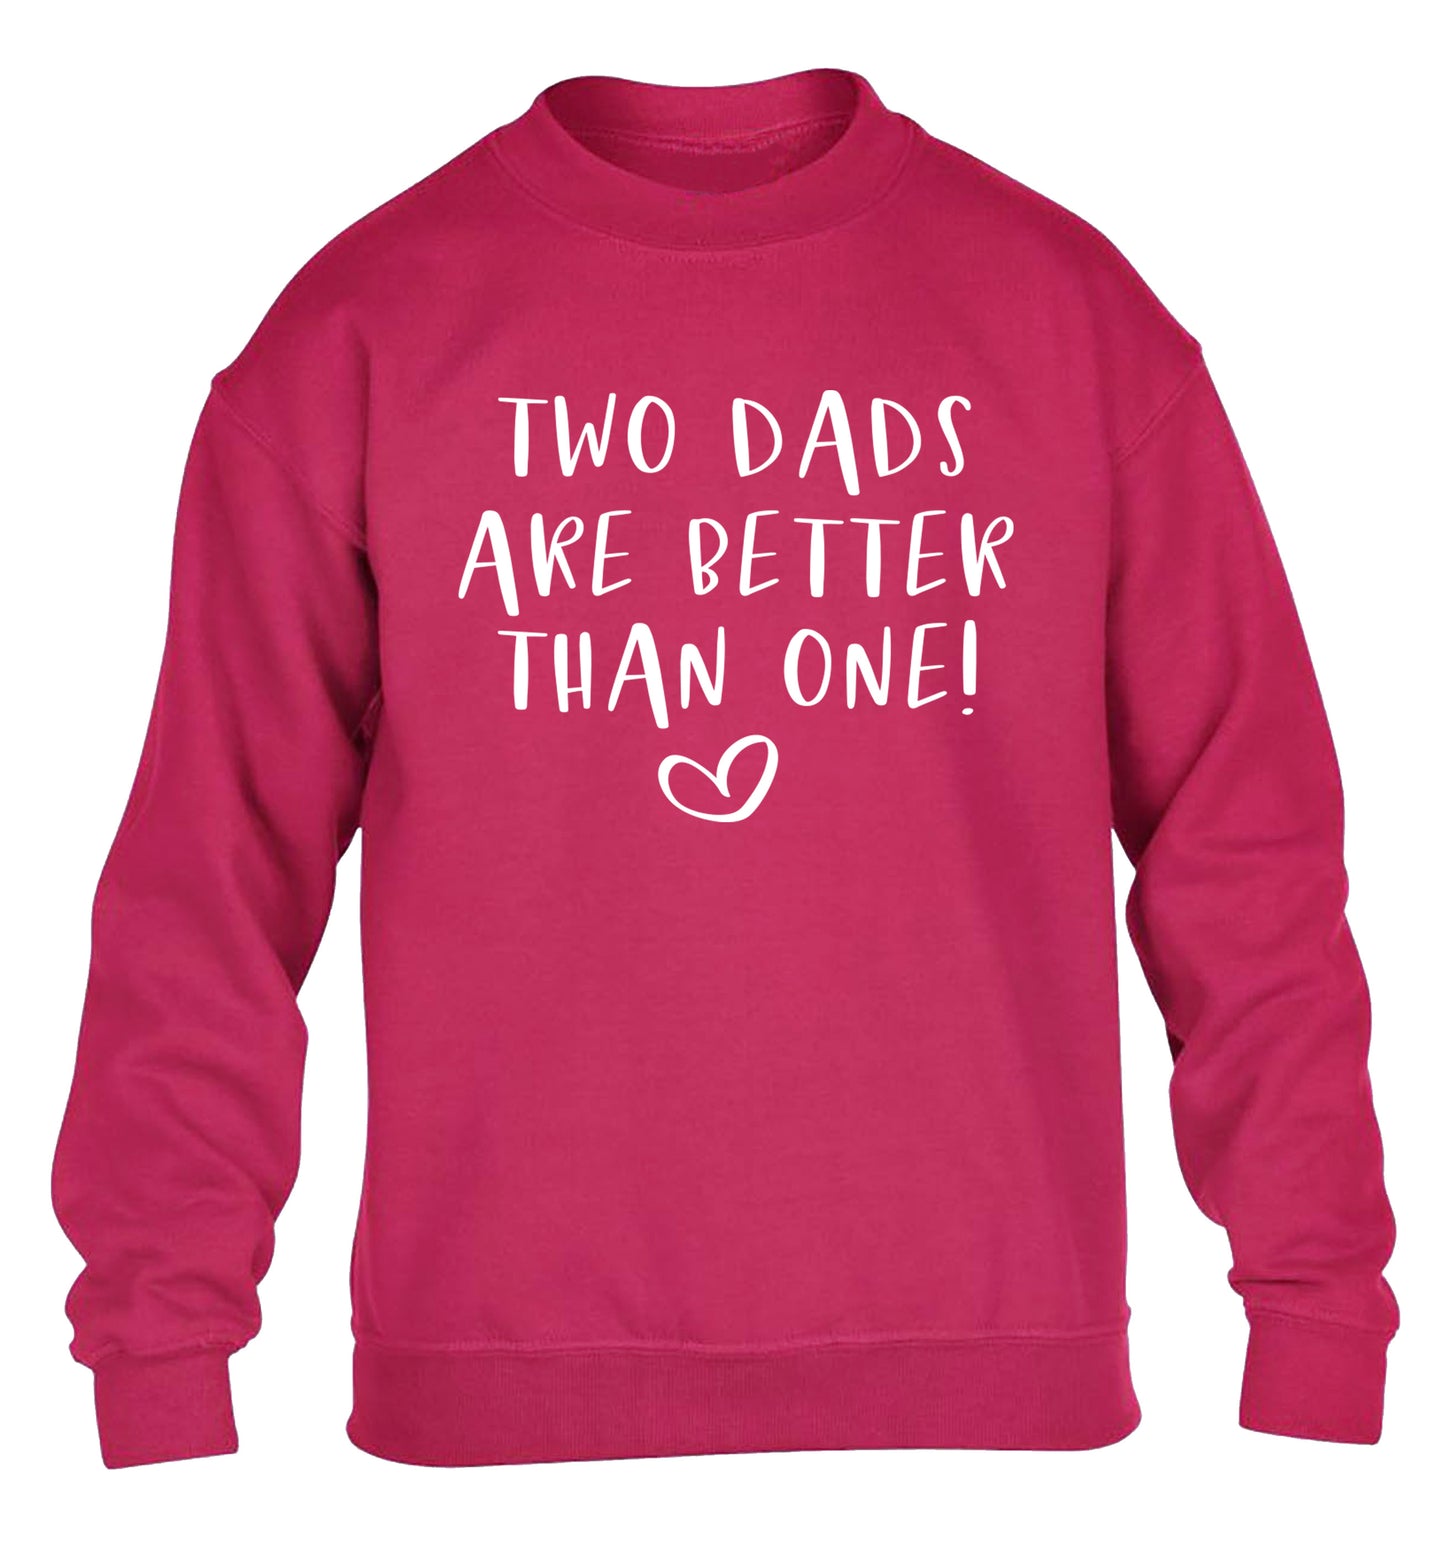 Two dads are better than one children's pink sweater 12-13 Years